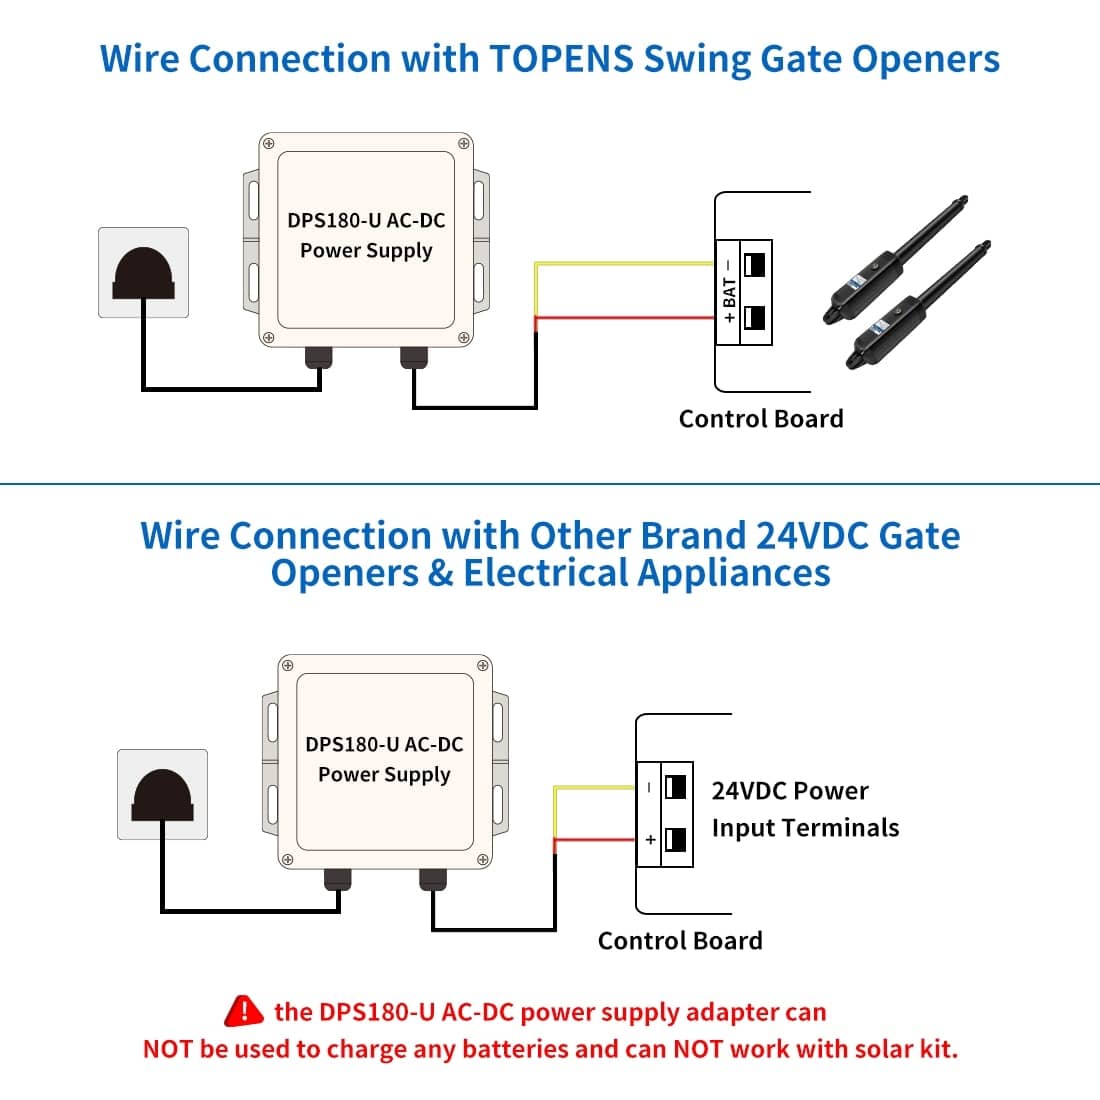 DPS180-U Waterproof AC to DC Power Supply Adapter Wire Connection and Compatibility